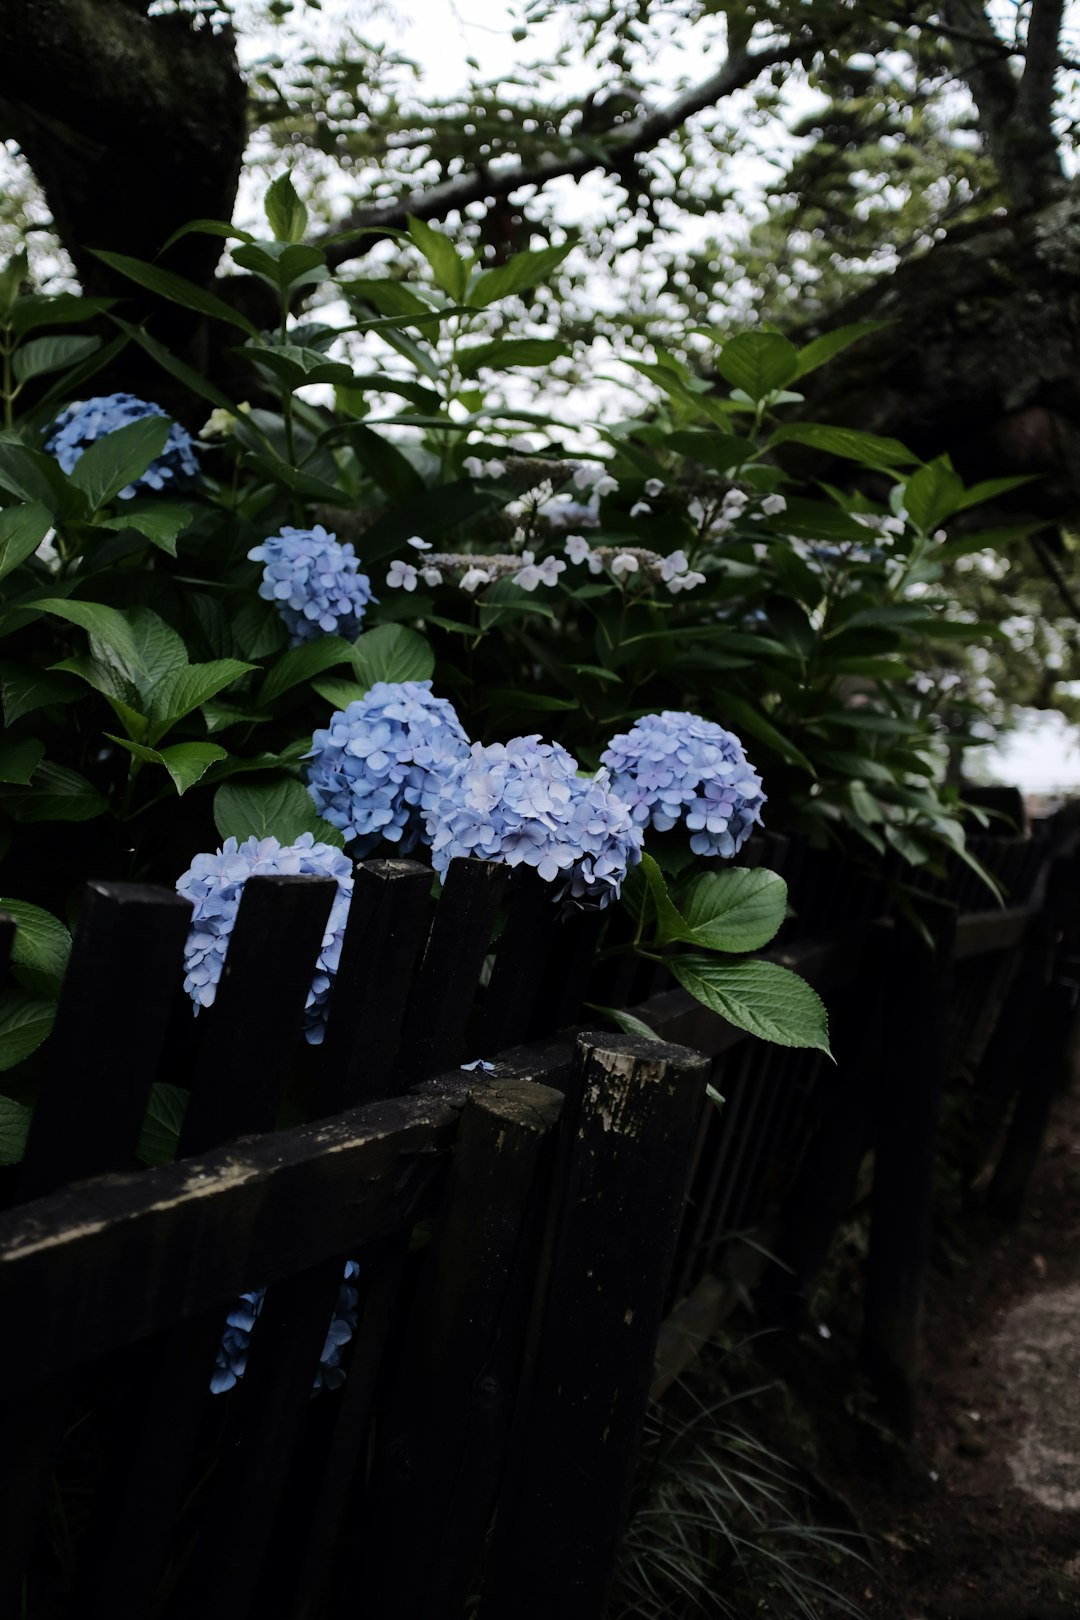 purple flowers on brown wooden fence